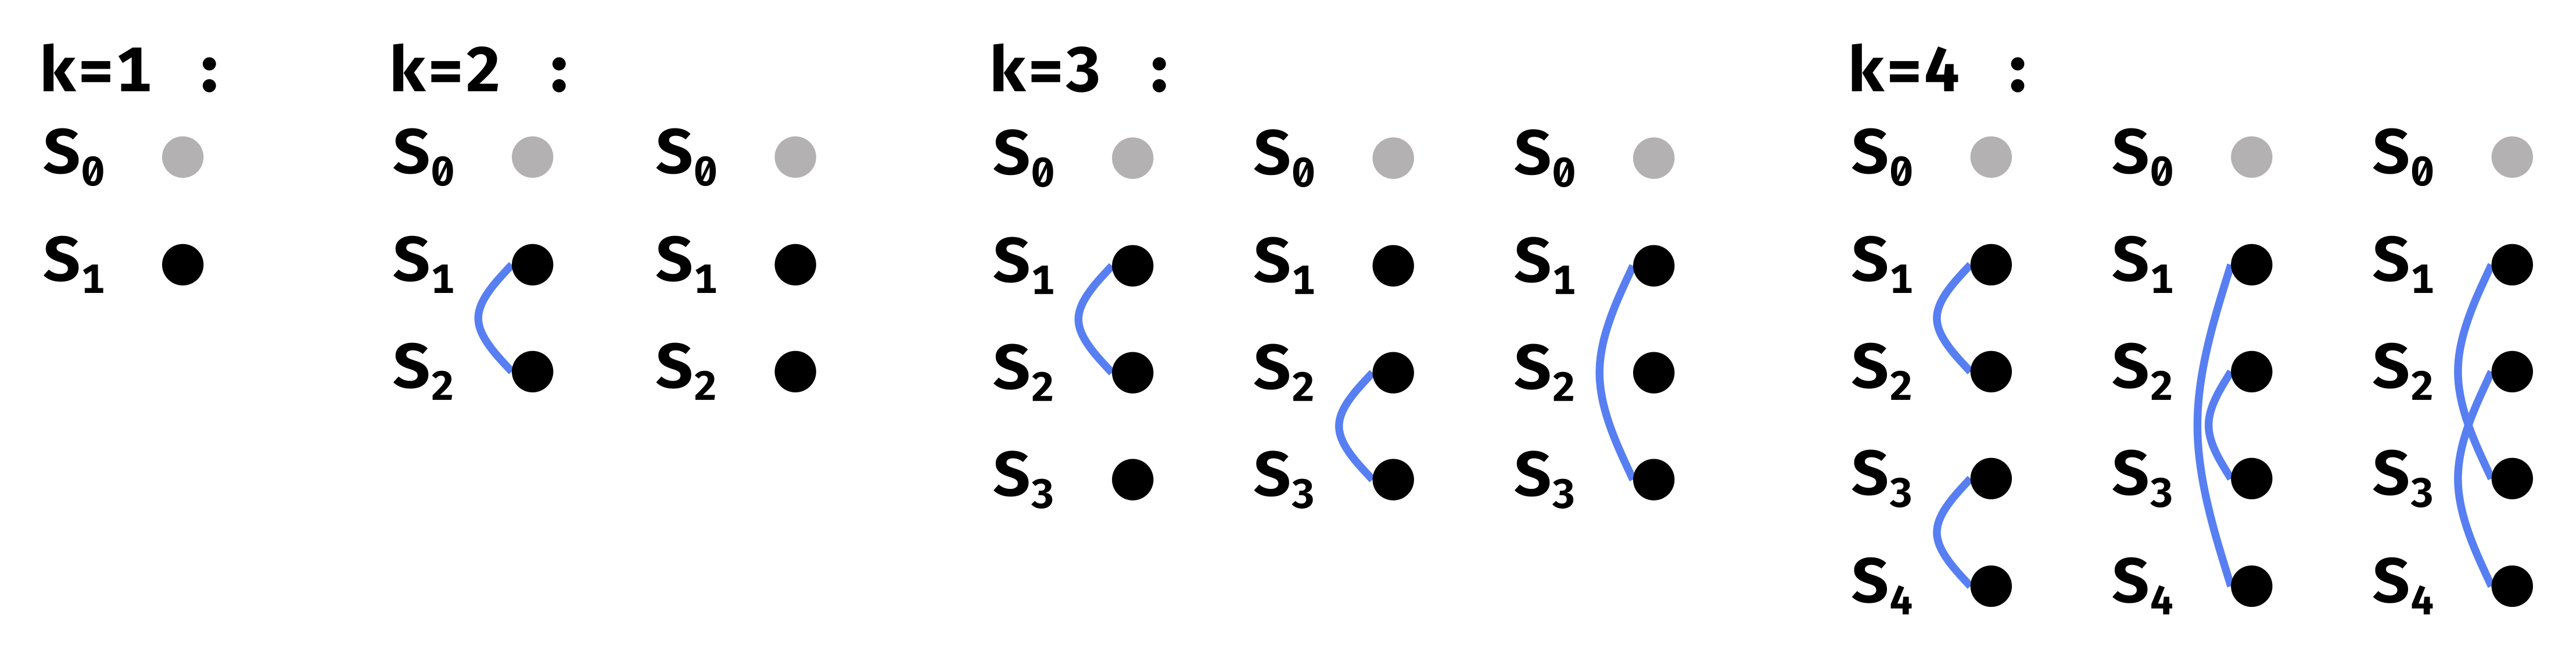 **SSR equivalence classes for a fixed partition of the inputs.**  
$S_0$ is always assigned $\varepsilon$, so it is represented by a gray
node. A blue link between $S_i$ and an $S_j$ denotes that
$\textsc{IsComp}(t(i), t(j))=\text{true}$. The equivalence classes are
determined by the Watson-Crick complementary relationships between the
rest of the parts, i.e. by all the possible ways to draw the blue links.